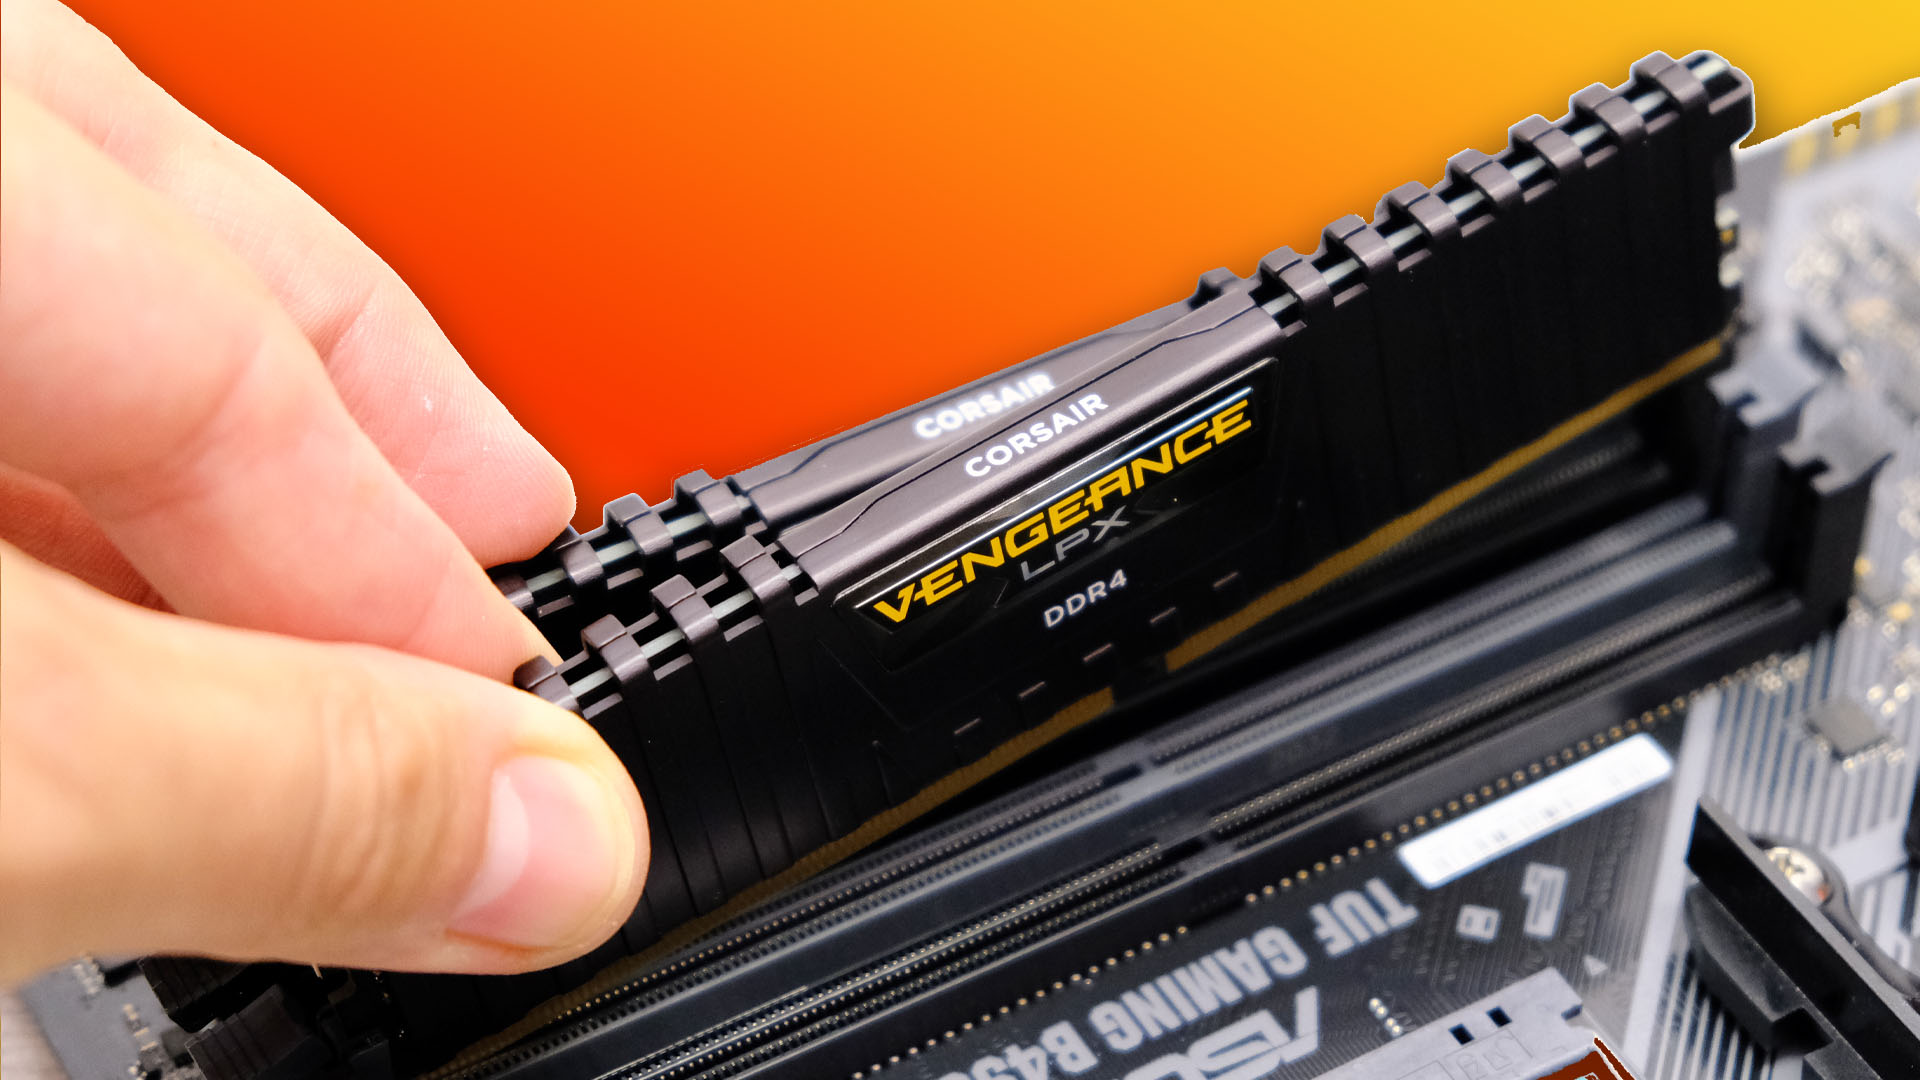 You can grab 32GB of Corsair RAM for an irresistible price right now